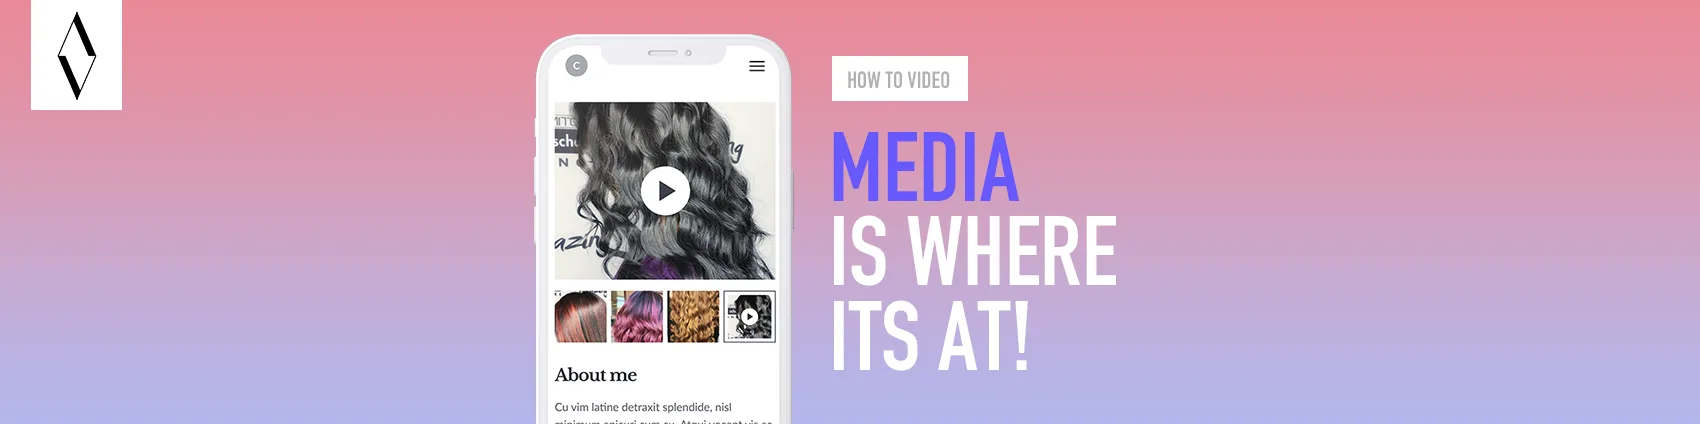 NEW* HOW TO SERIES: Getting Started with Media